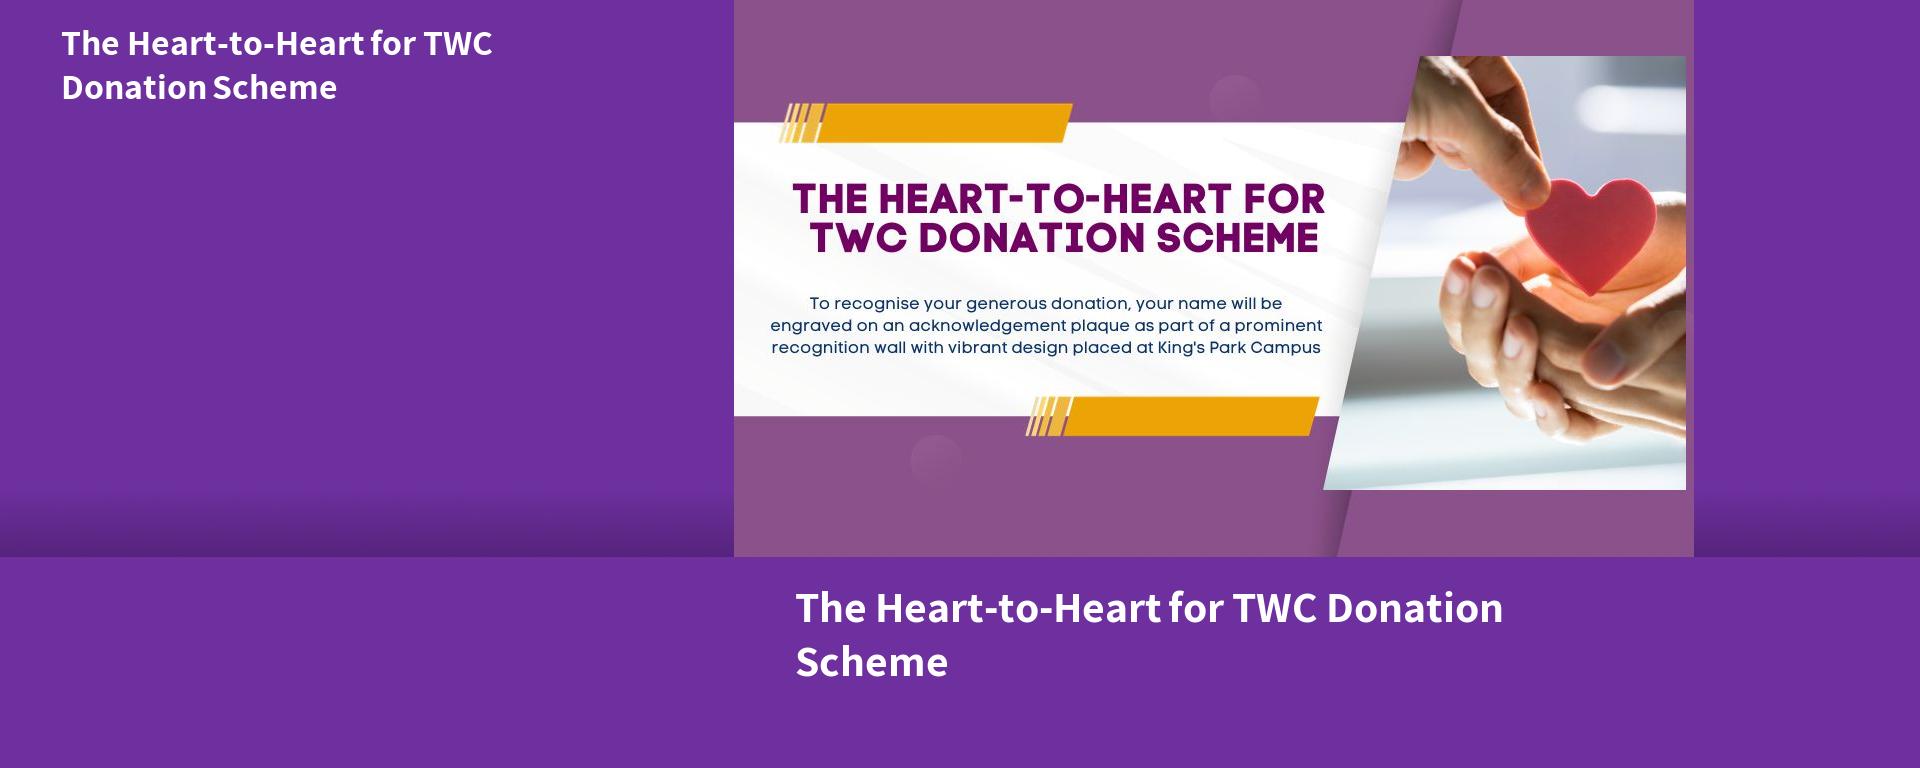 The Heart-to-Heart for TWC Donation Scheme